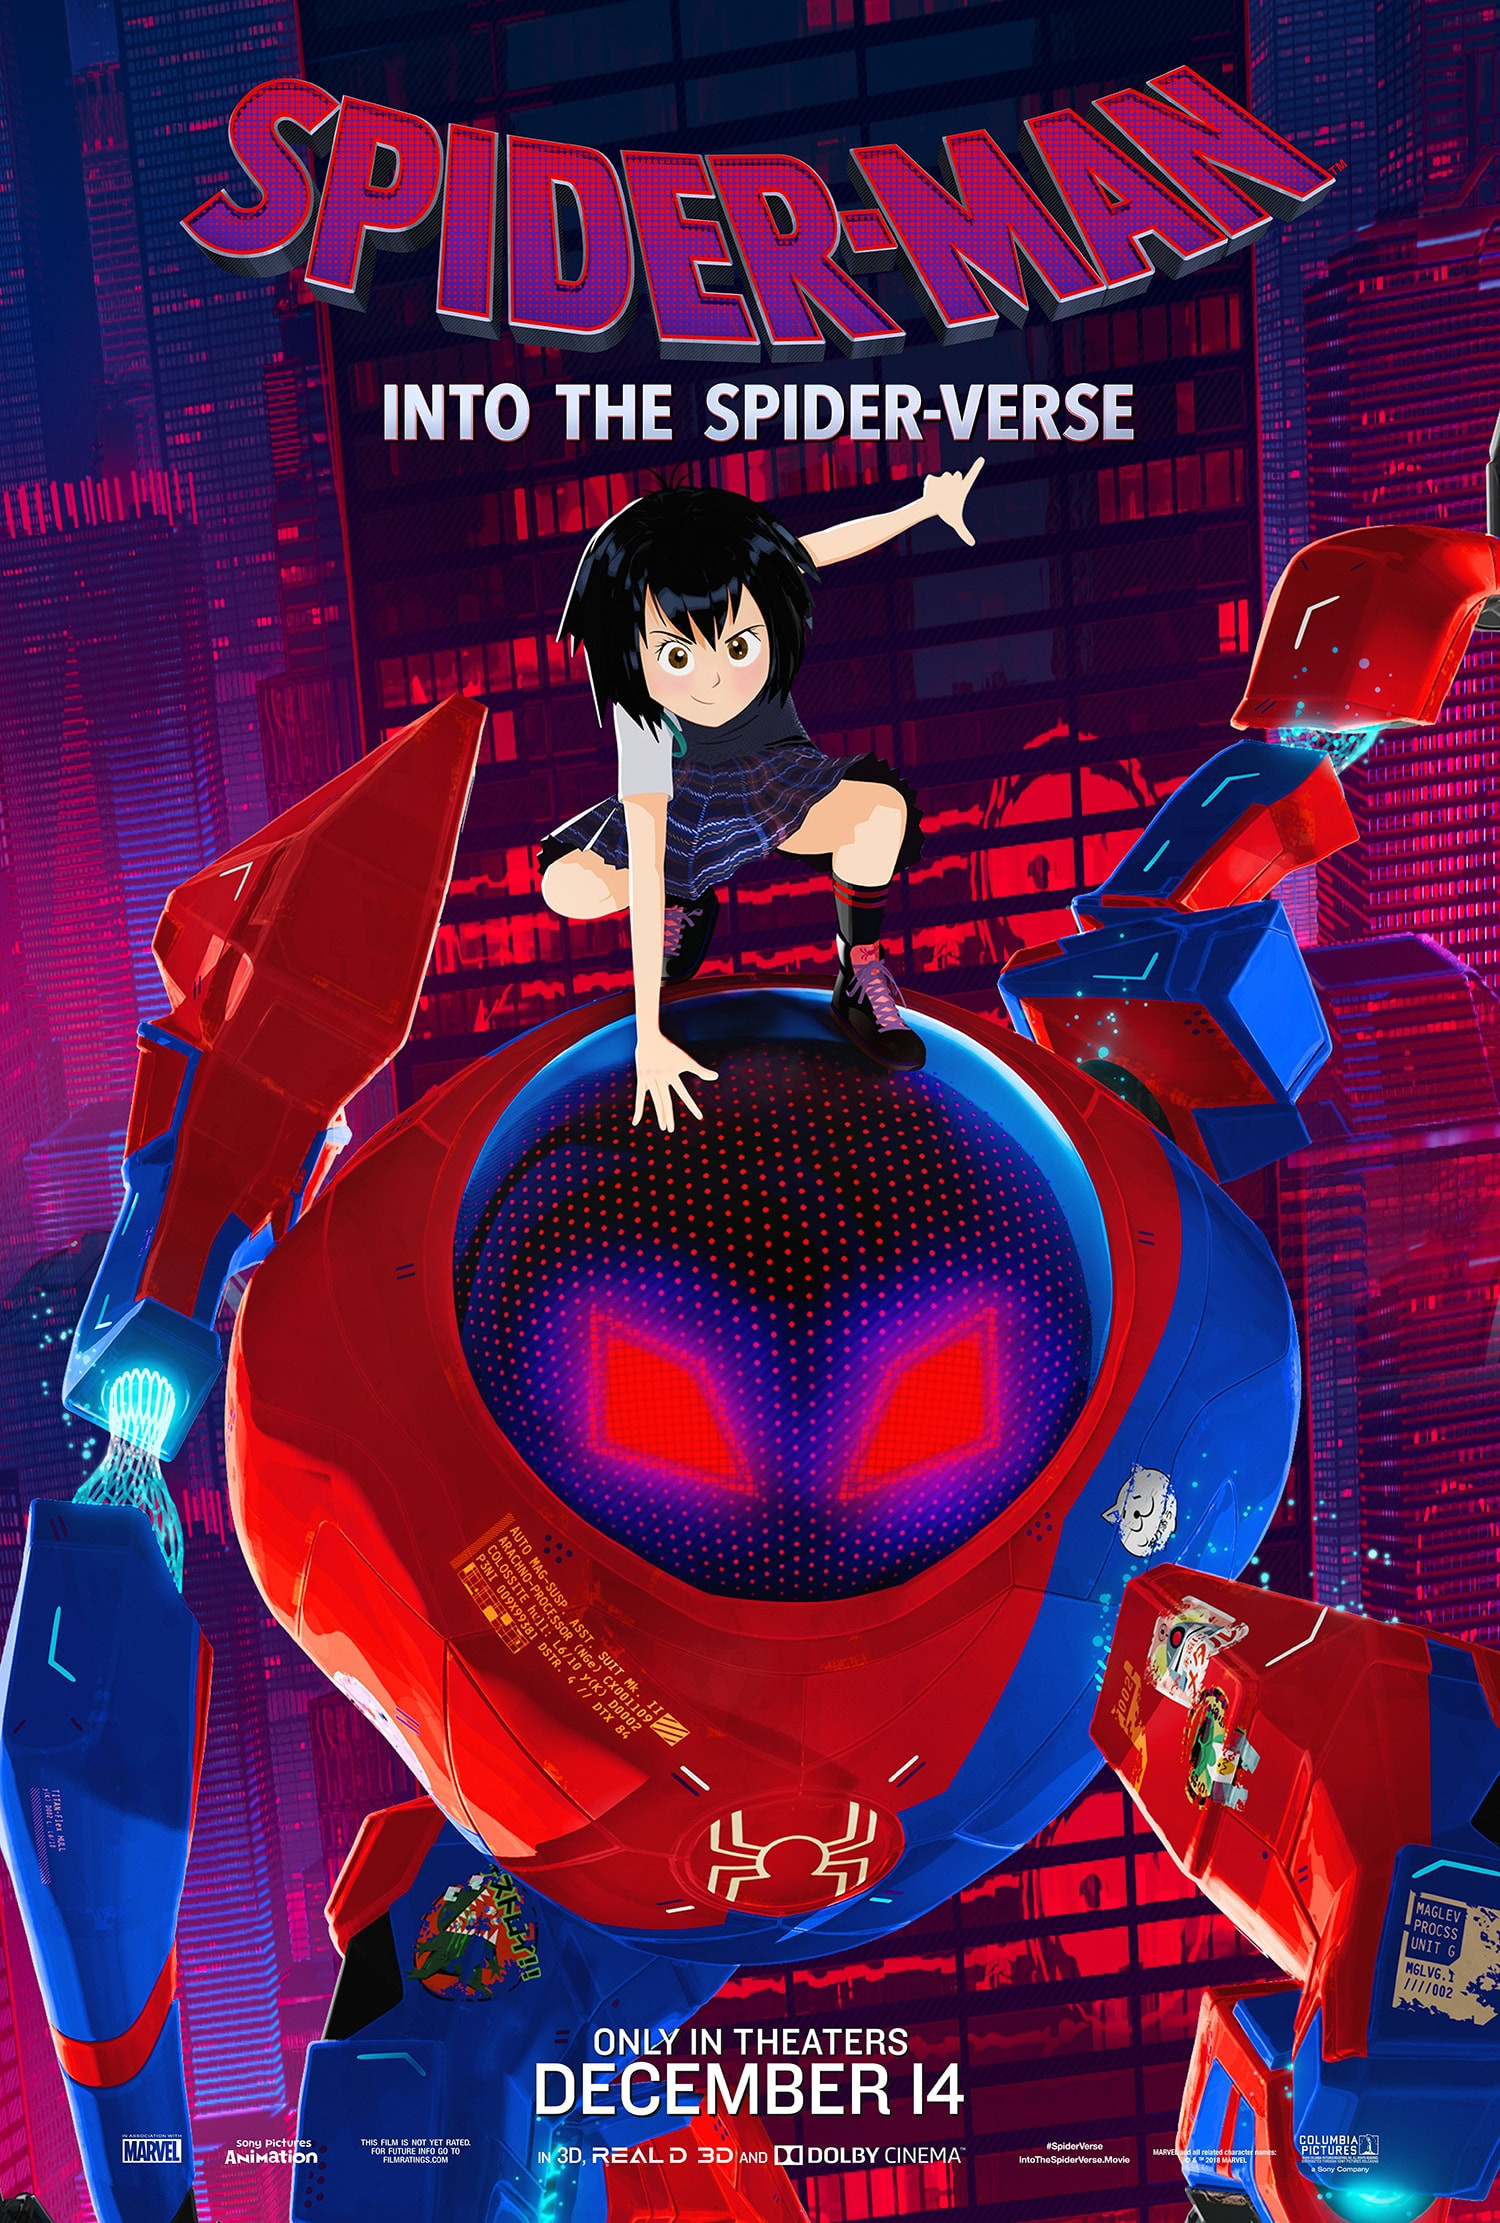 kimiko-glenn-voices-peni-parker-seen-here-with-spdr-in-spide_zp6h-min.jpg